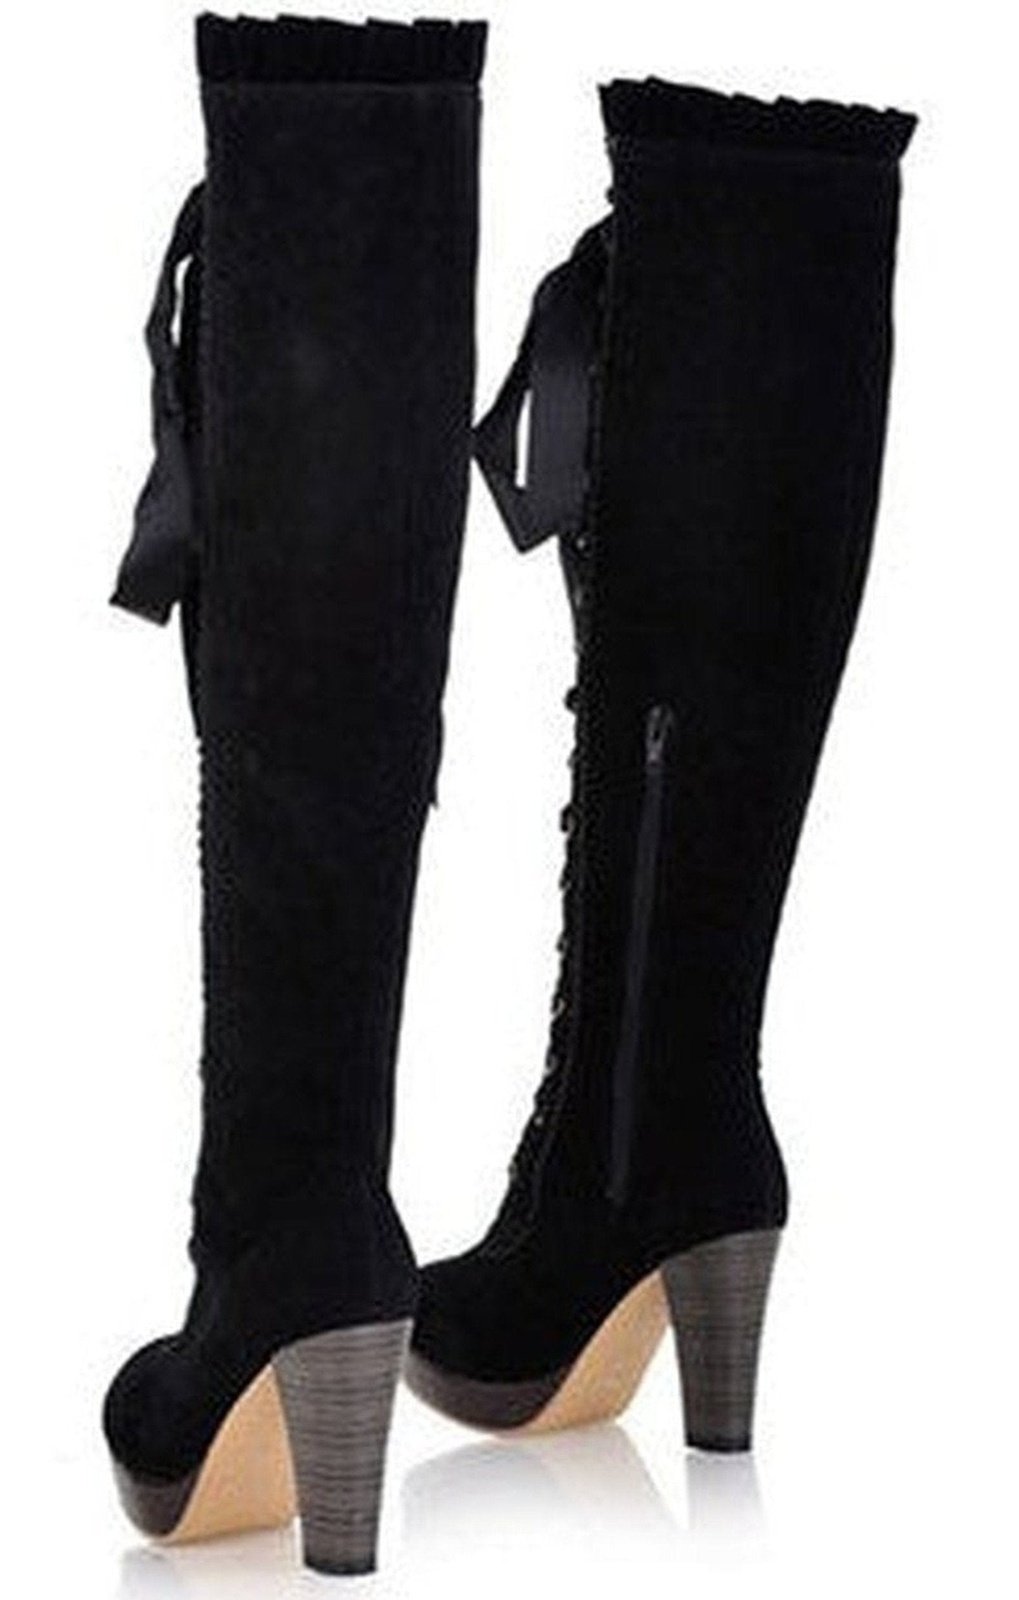 Lace Front Boots - 4" Platform Heels and Elevated Footbeds ( 2 COLORS)